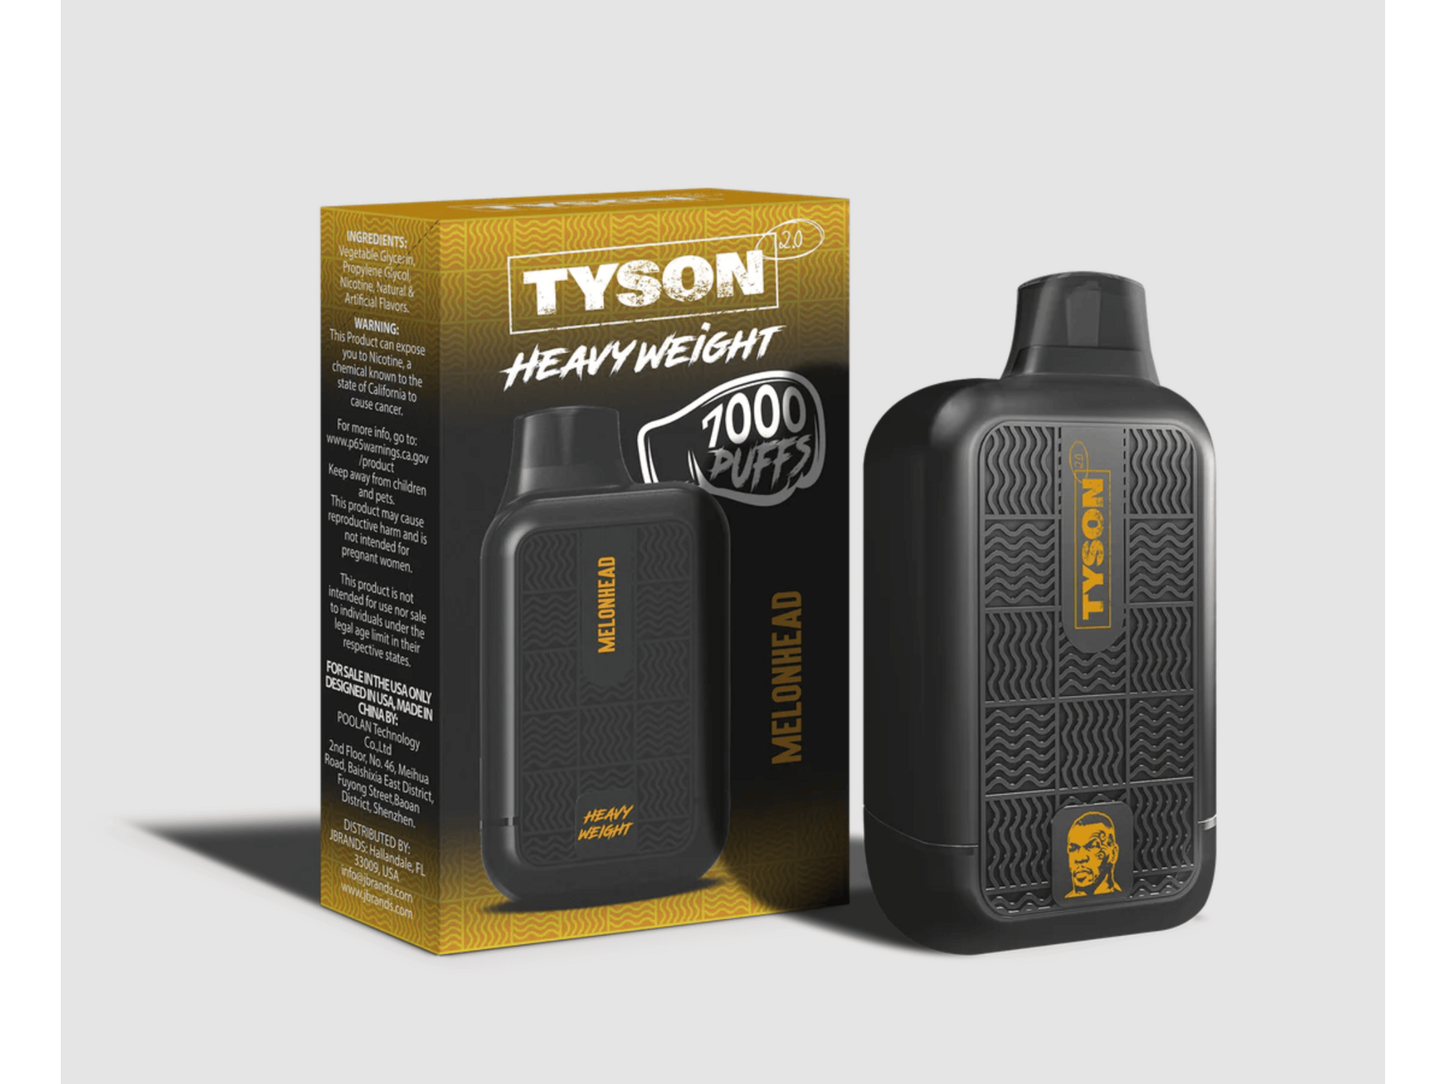 Tyson Heavyweight MelonHead flavored disposable vape device and box.